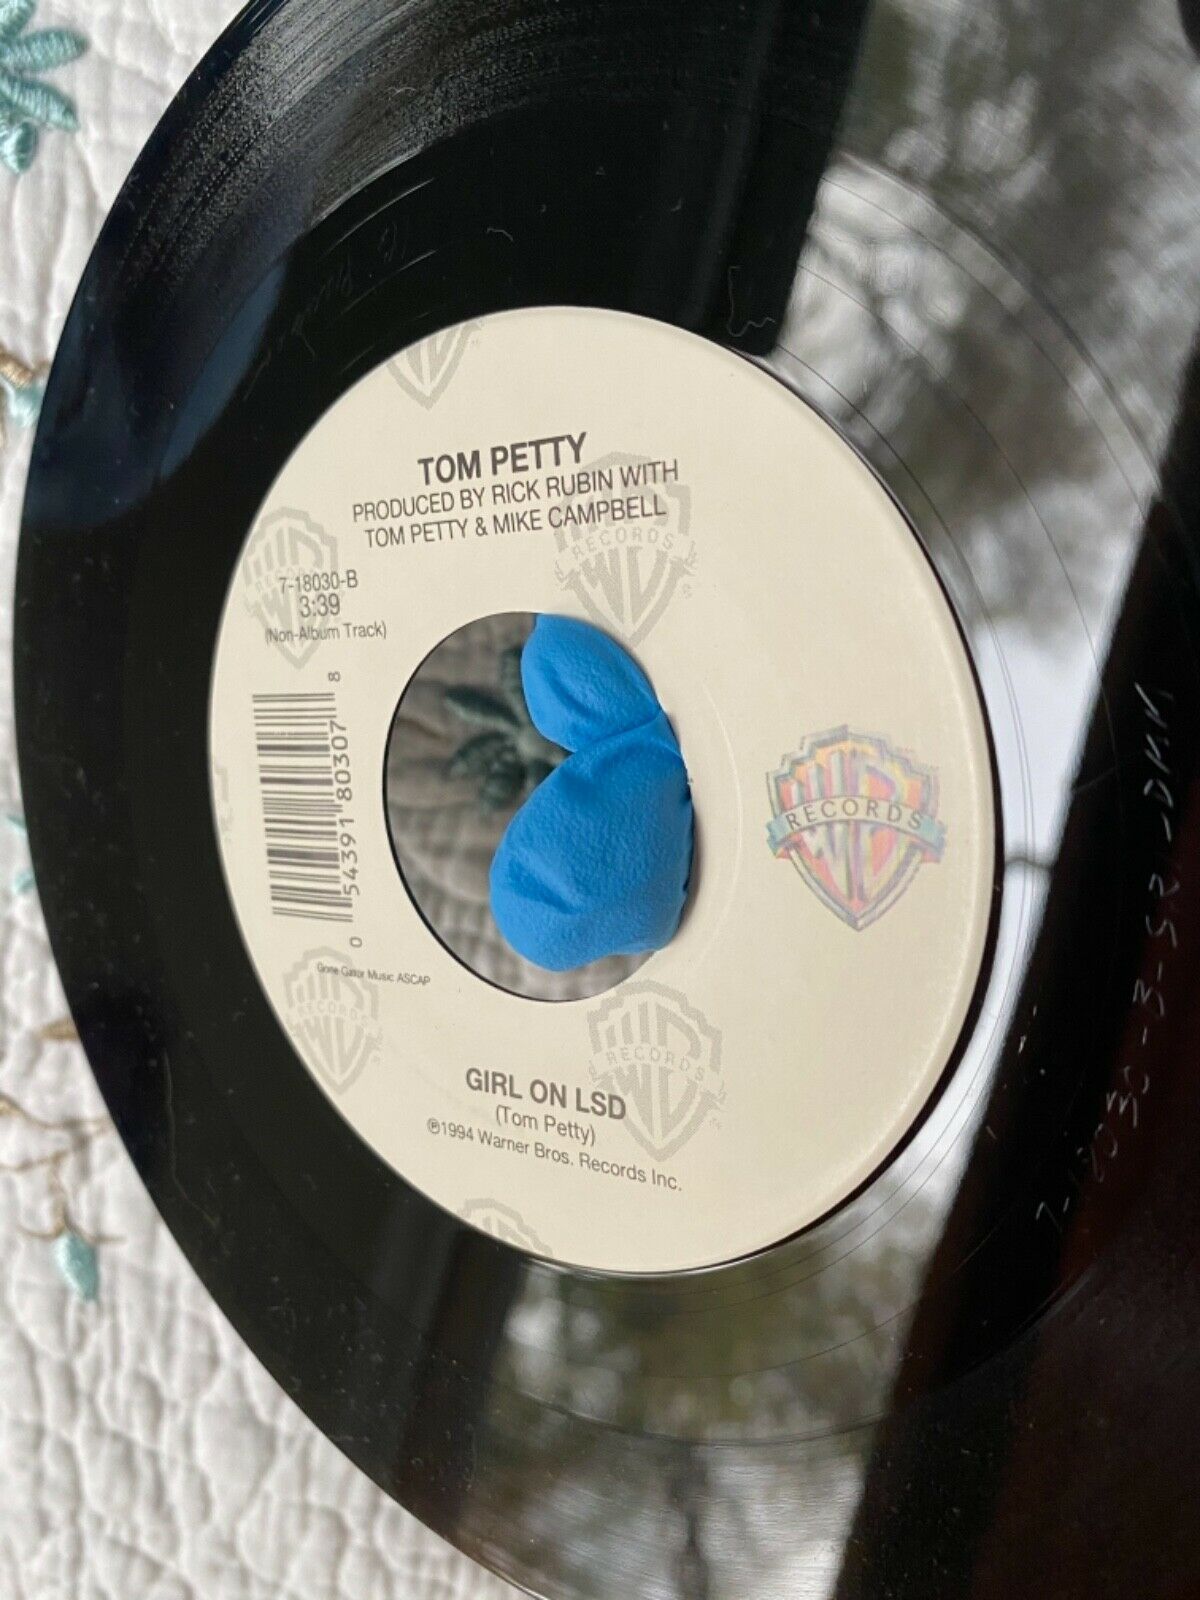 popsike.com - TOM PETTY 7” SINGLE “GIRL ON LSD” ORIGINAL B-SIDE “YOU DON'T  KNOW HOW..” - auction details